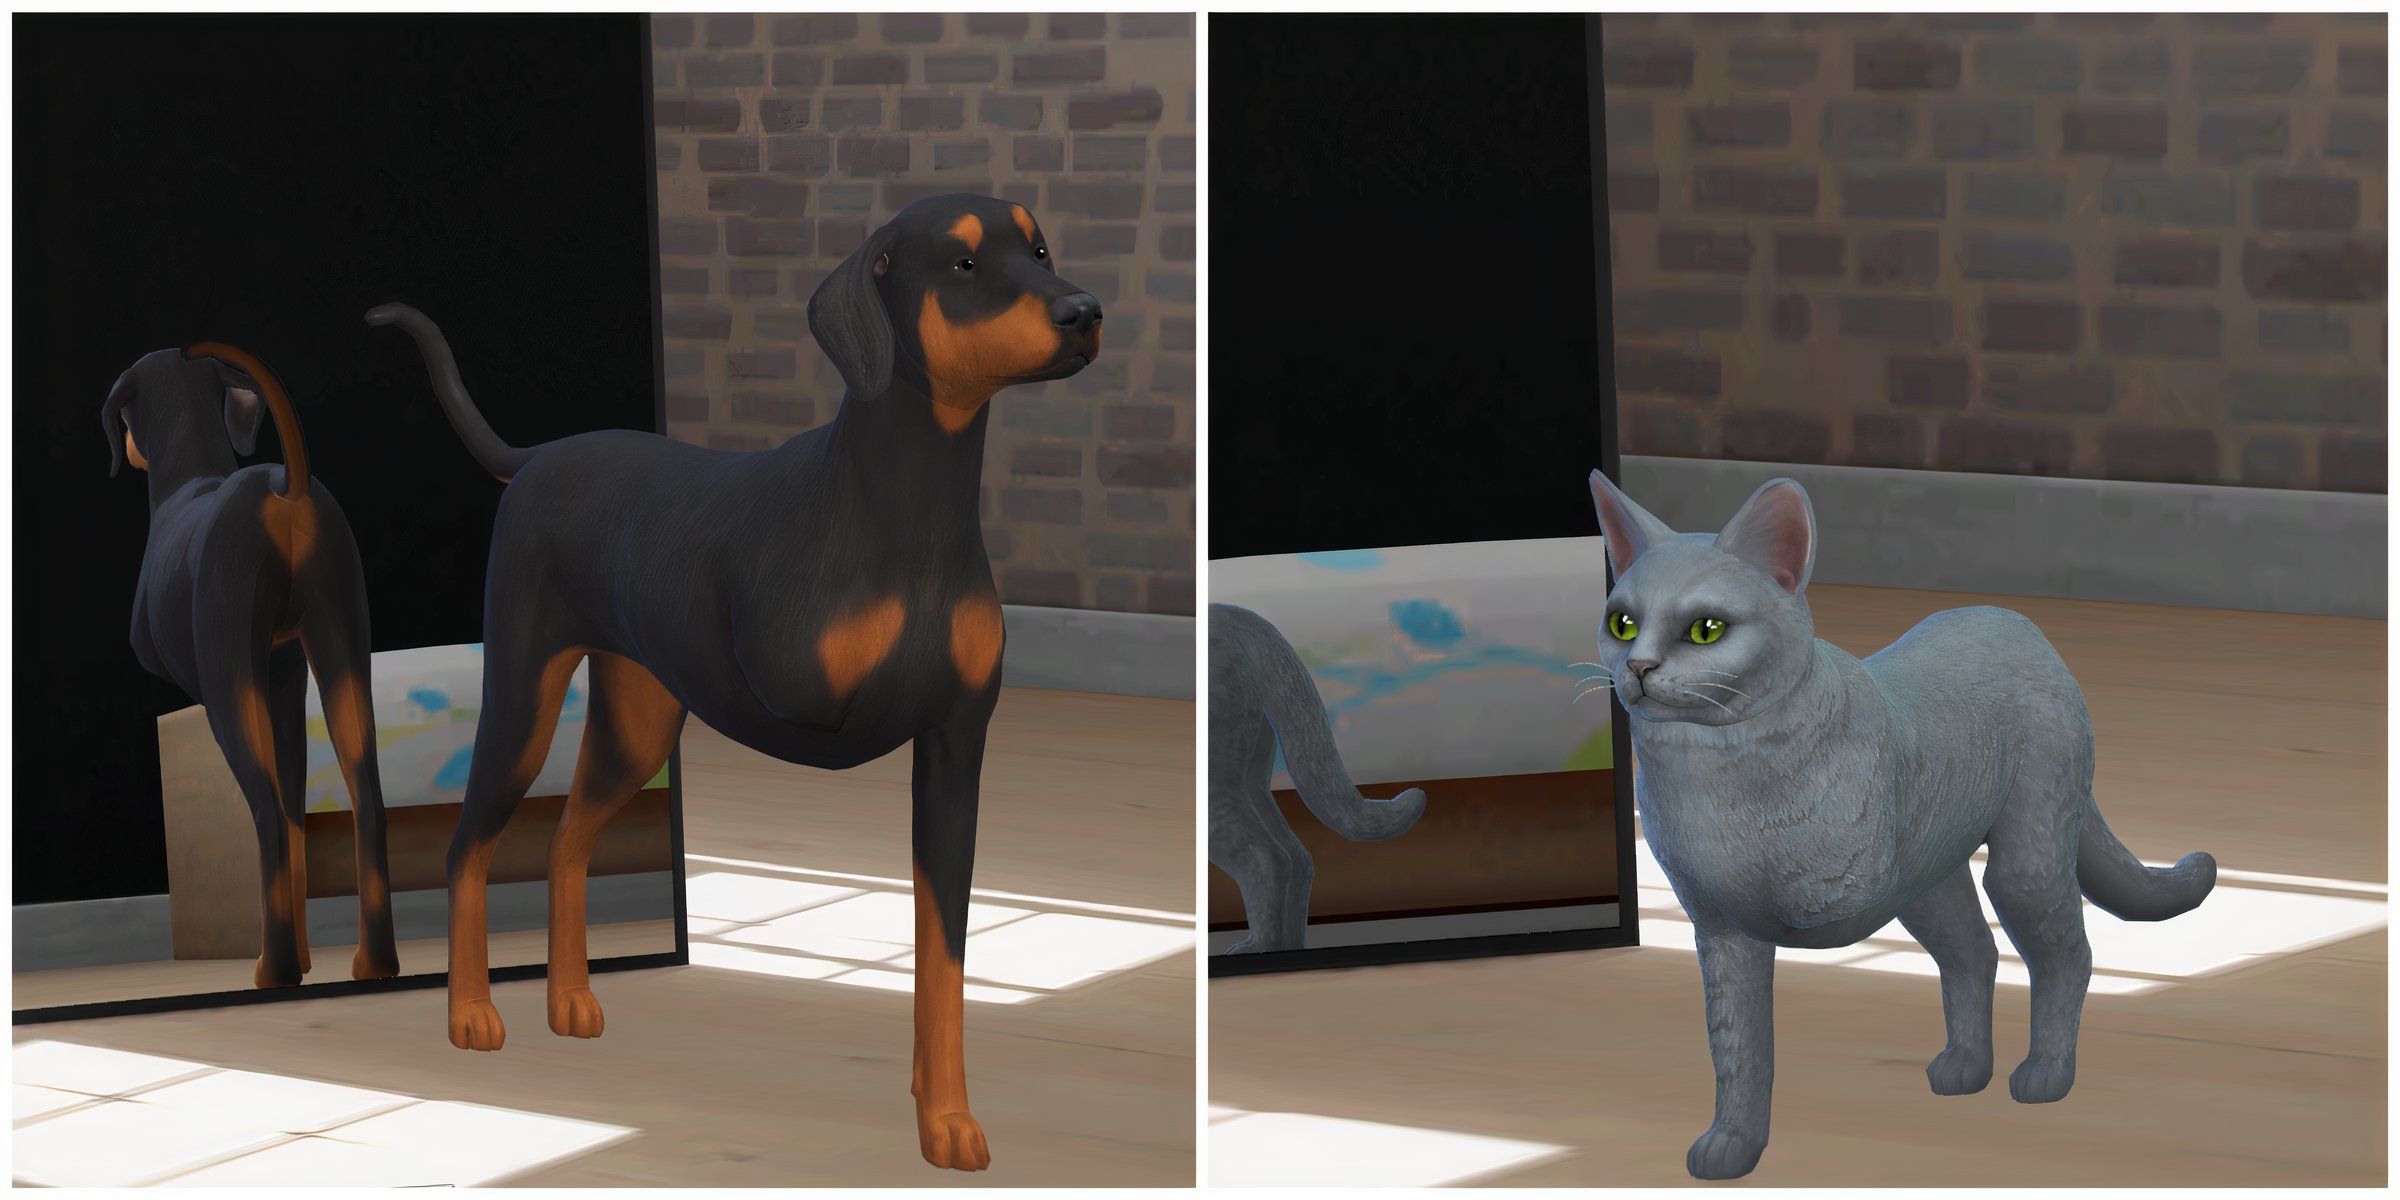 A three-legged dog and a three-legged cat, which can be made with the Three Legged Furrends mod